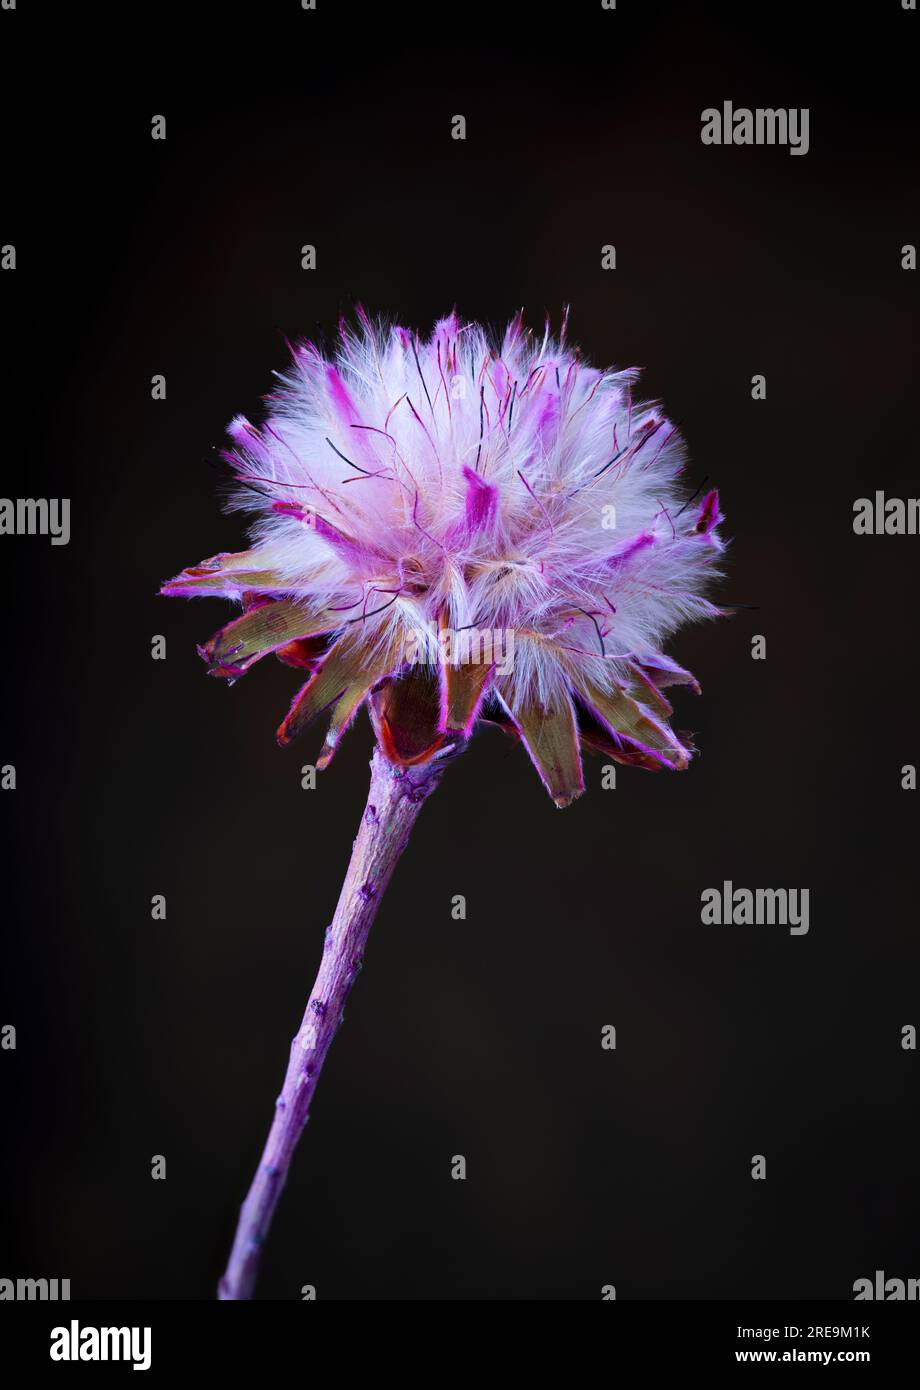 The unusual flowerhead of an Australian plant, the Hairy Mulla Mulla, (Ptilotus helipteroides), photographed against a plain dark background Stock Photo